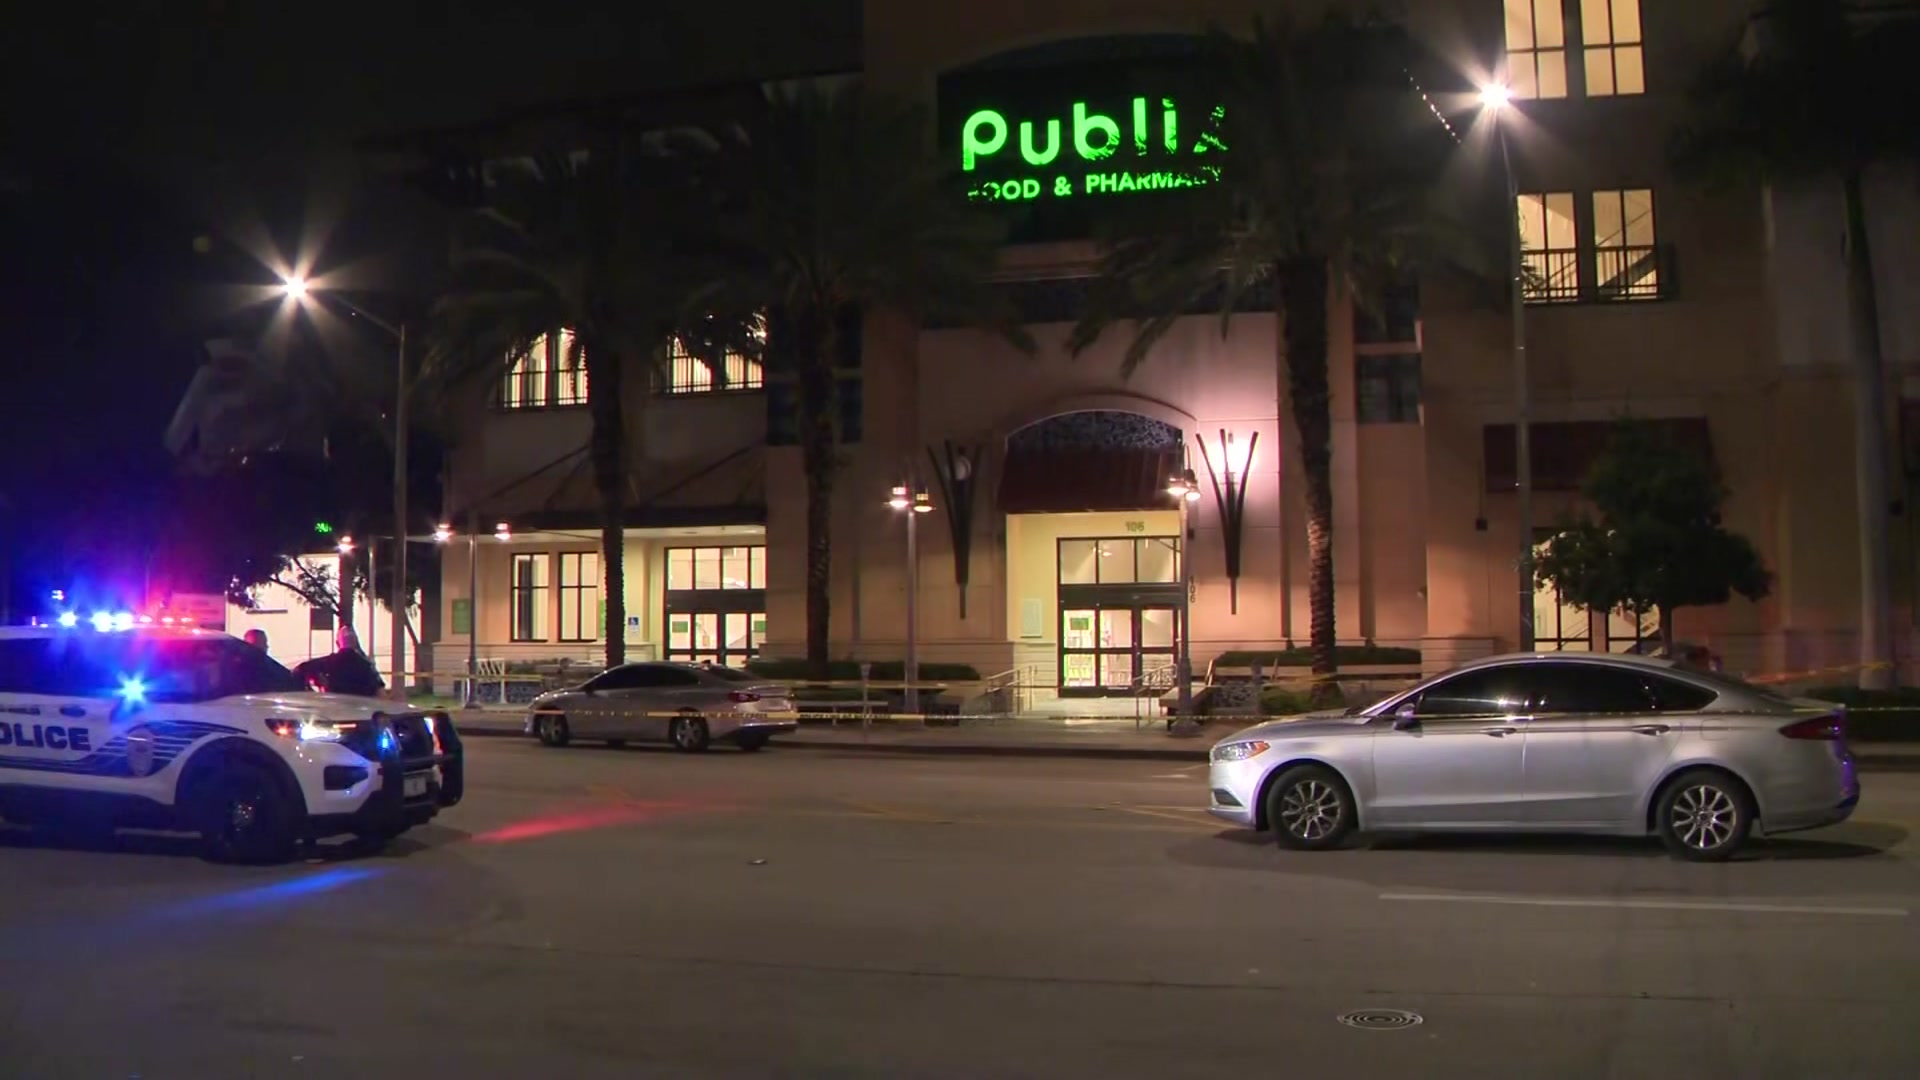 Dispute Between Publix Shoppers Takes Deadly Turn